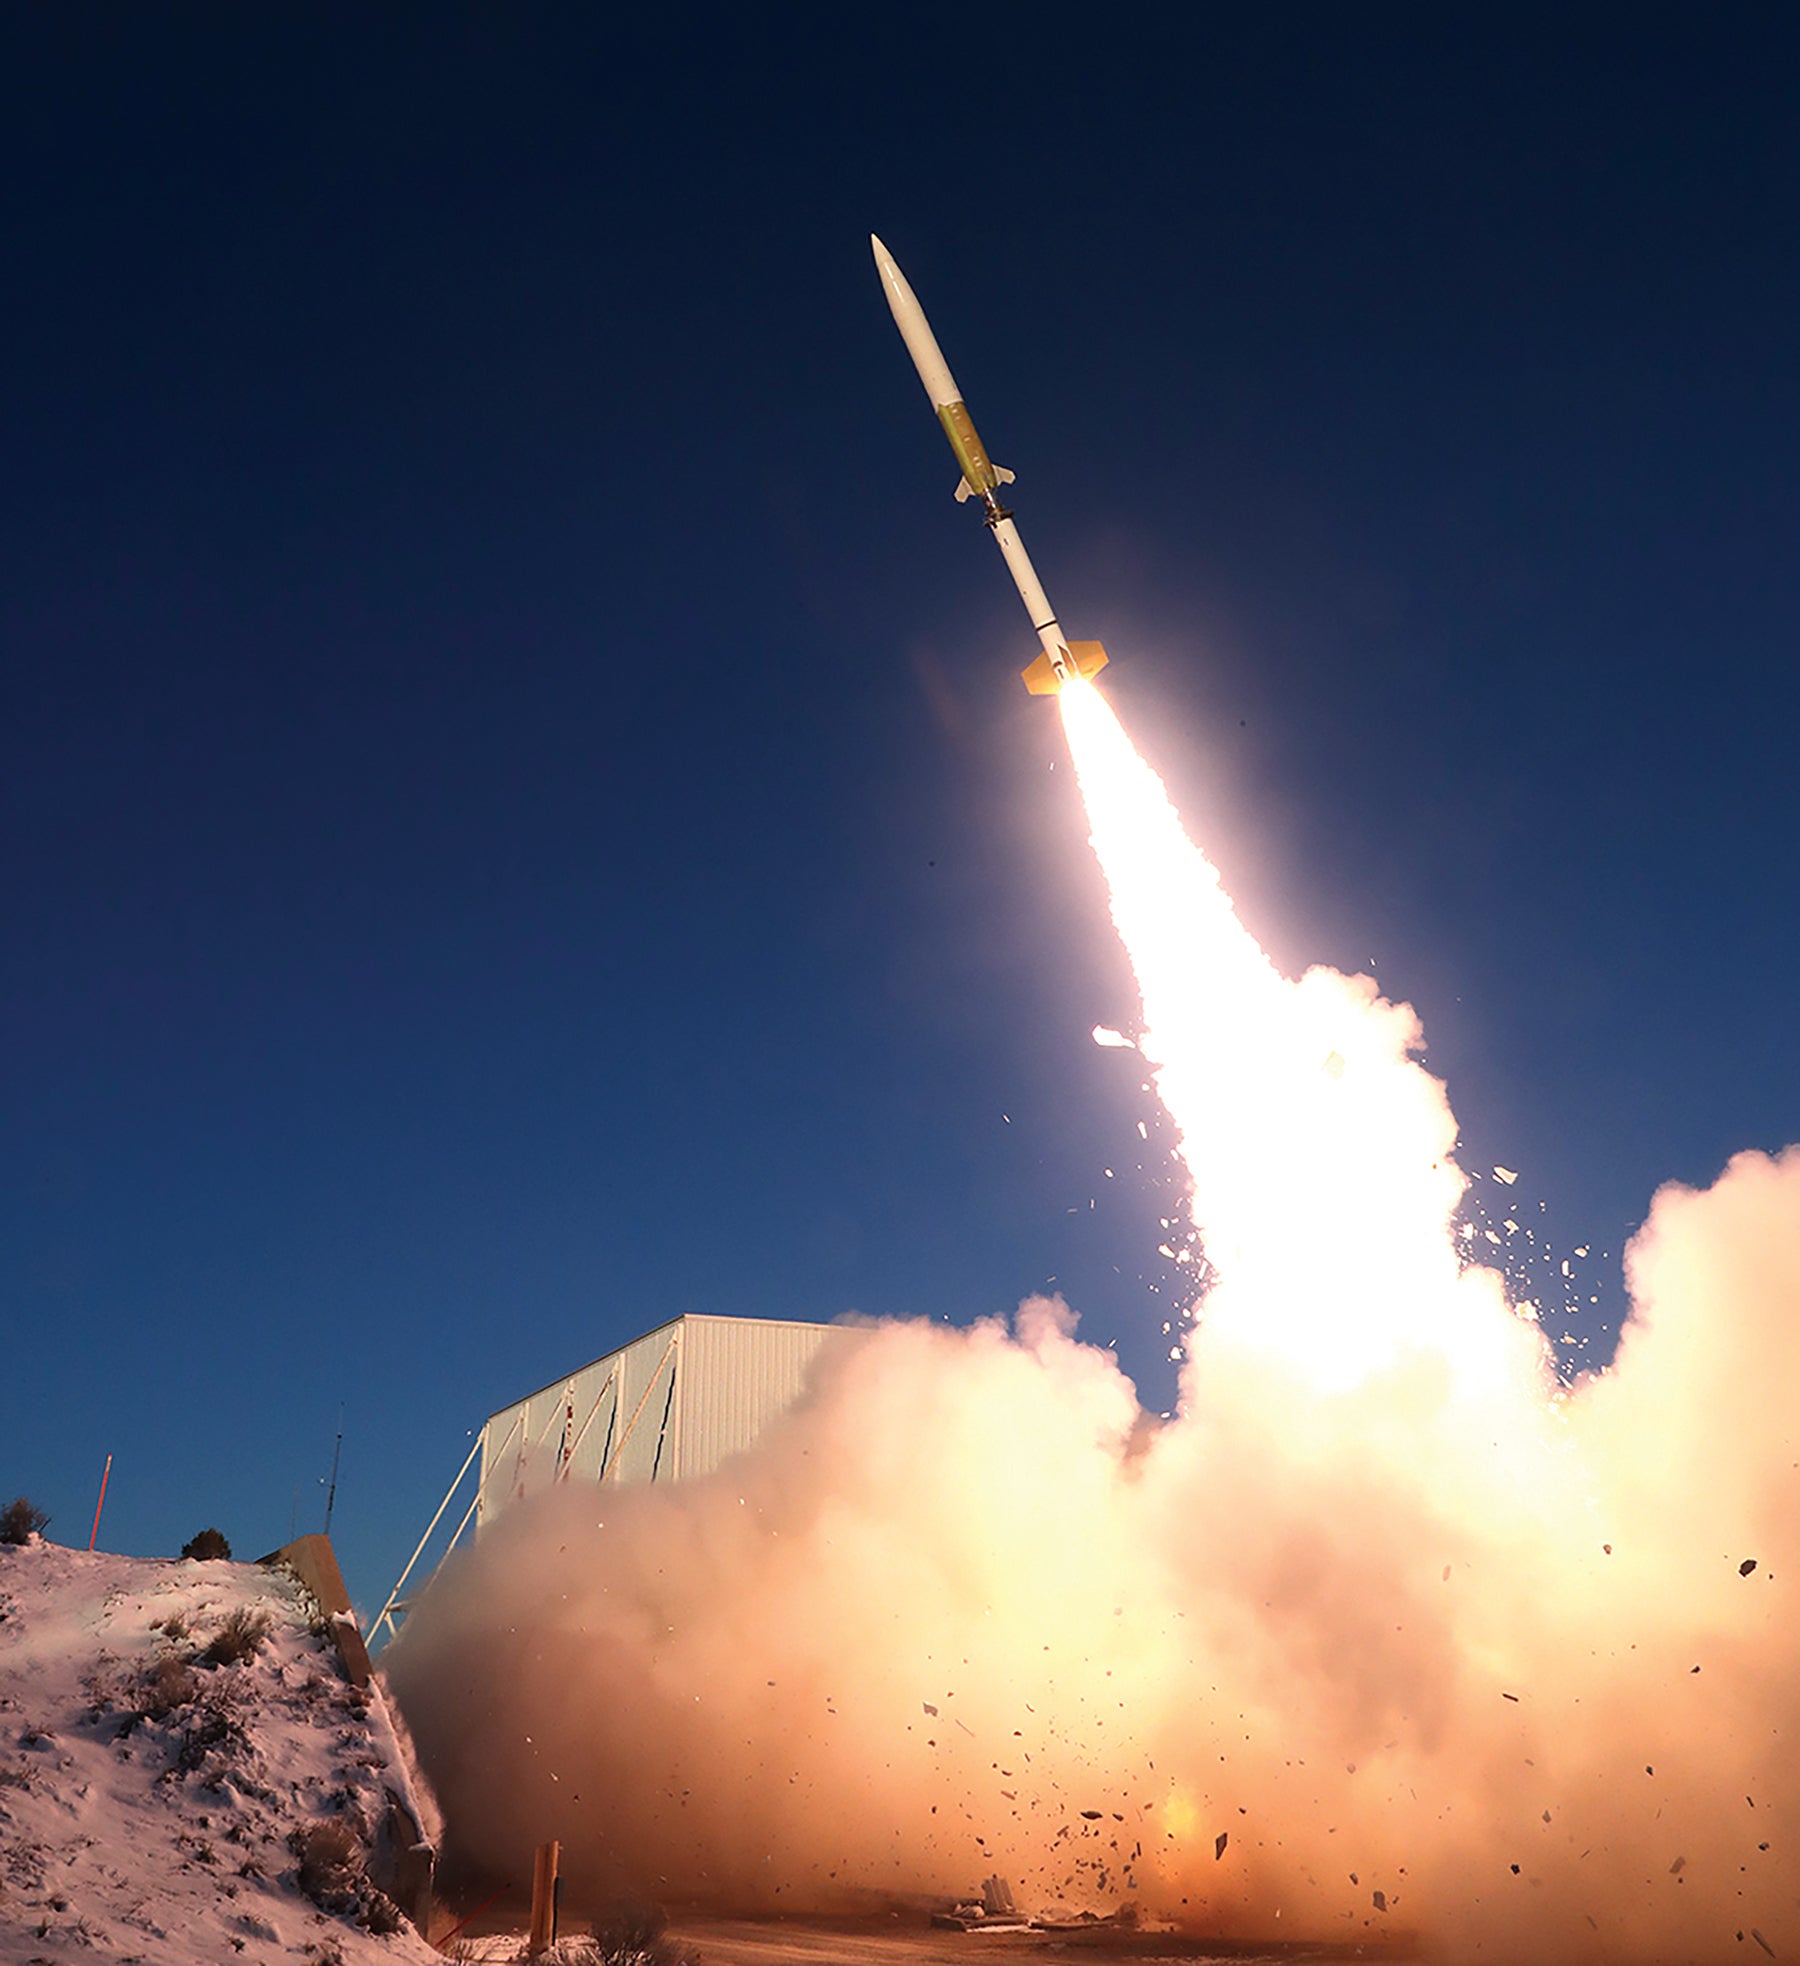 The command launches a Black Dagger target during missile defense testing at Fort Wingate, New Mexico. (Credit: U.S. Army/Jason Cutshaw)